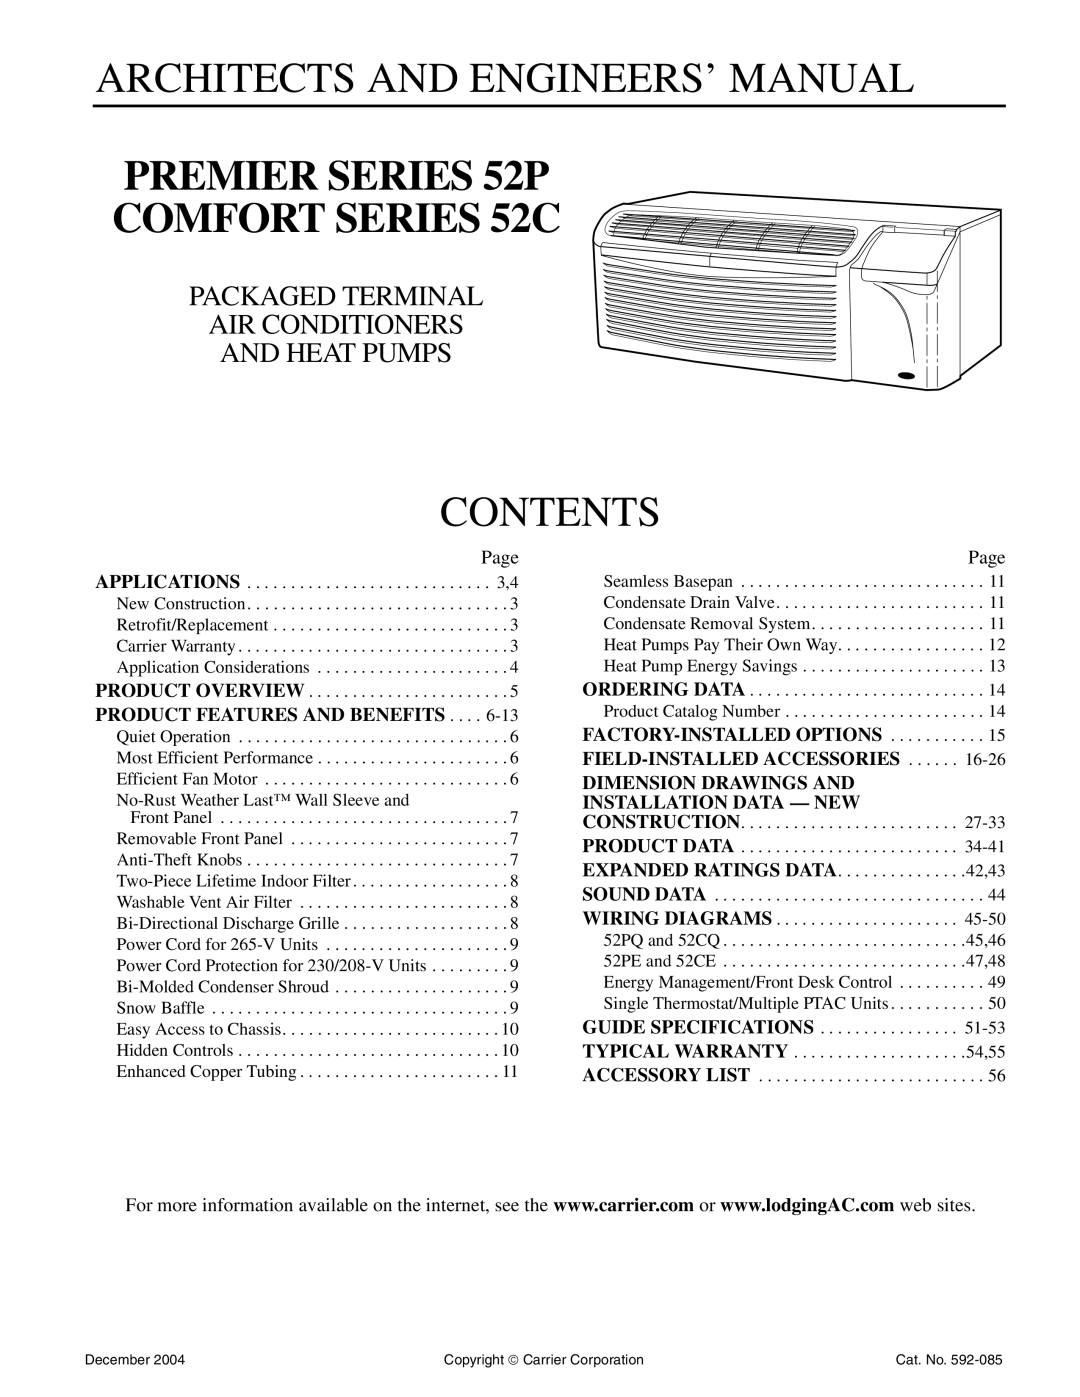 Carrier 592-085 warranty Architects And Engineers’ Manual, Contents, Packaged Terminal Air Conditioners And Heat Pumps 